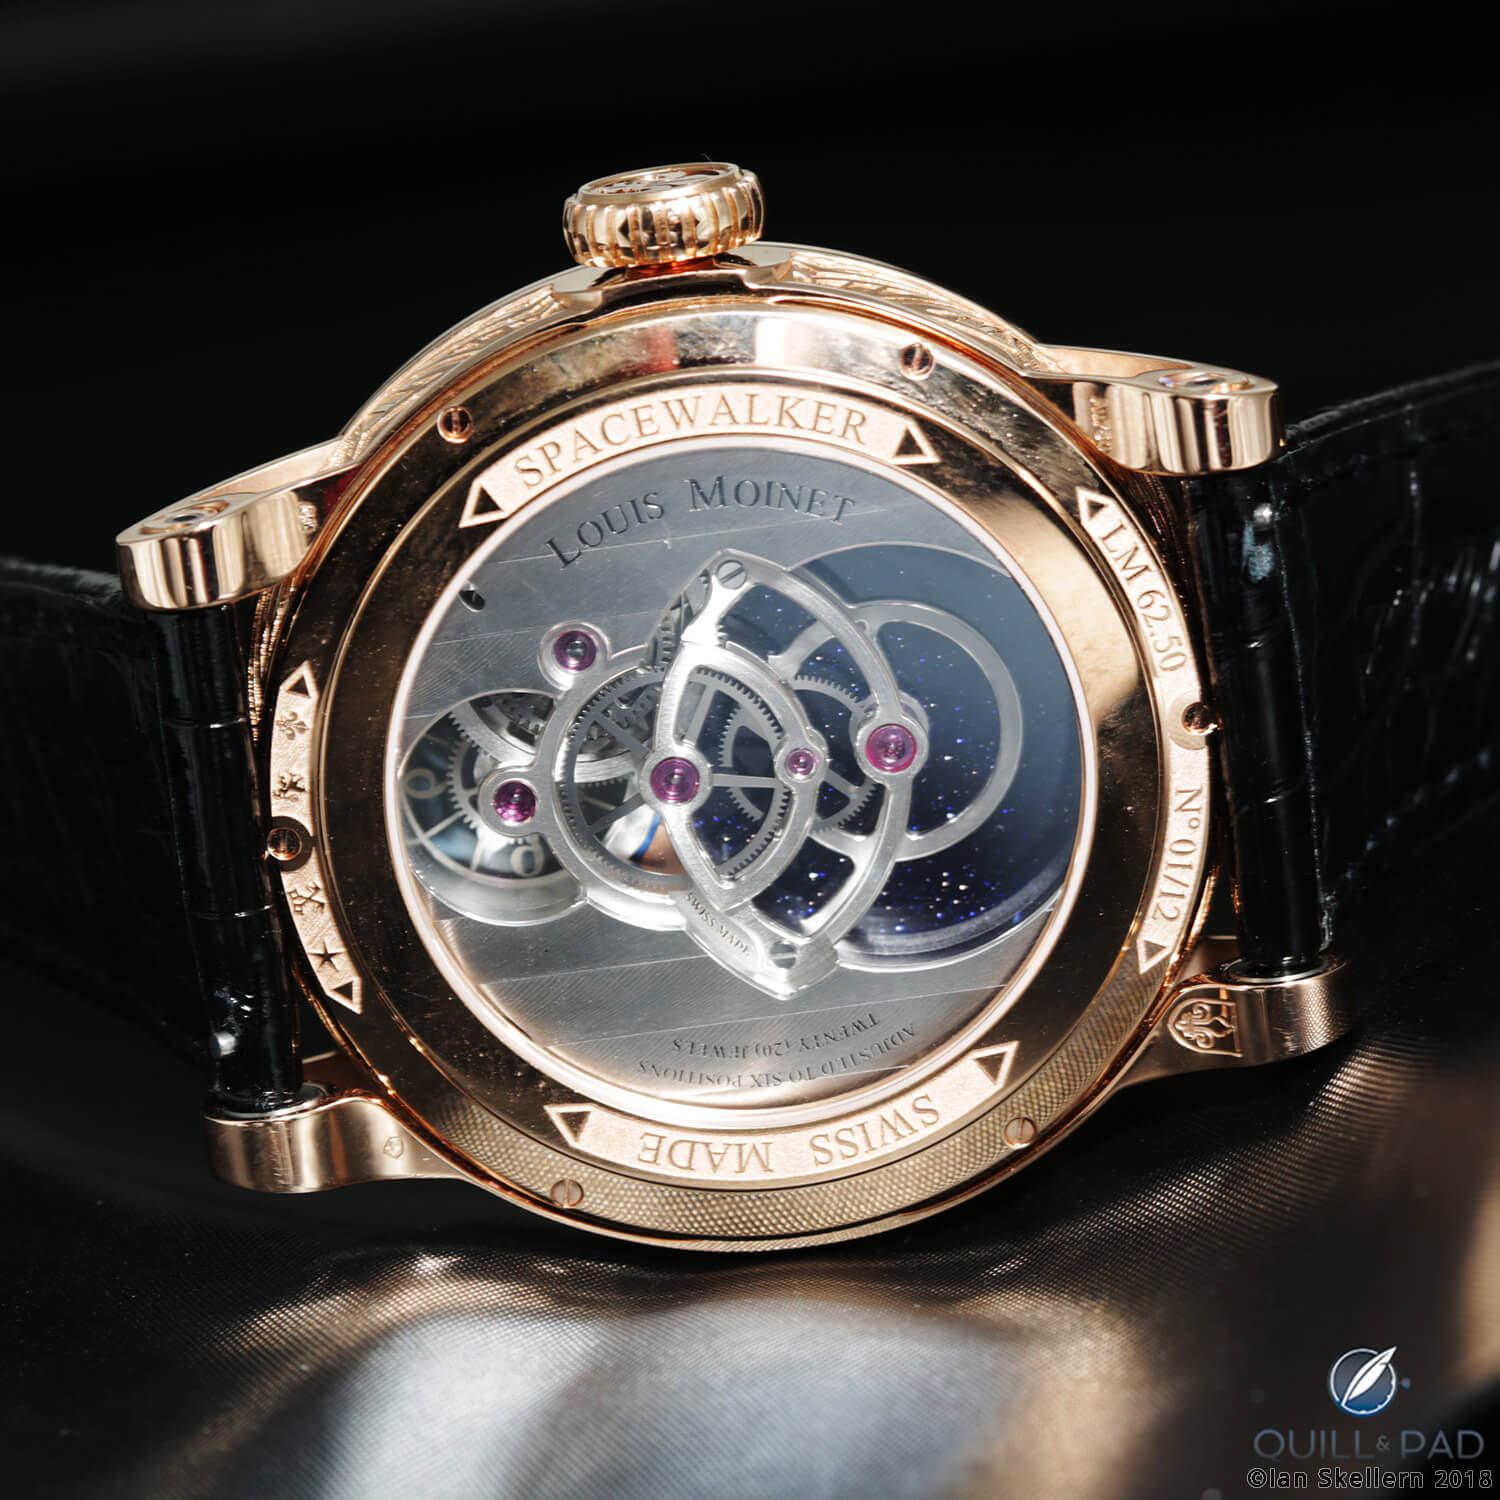 View from the back of the open movement of the Louis Moinet Spacewalker to the scintillating adventurine galaxy beyond